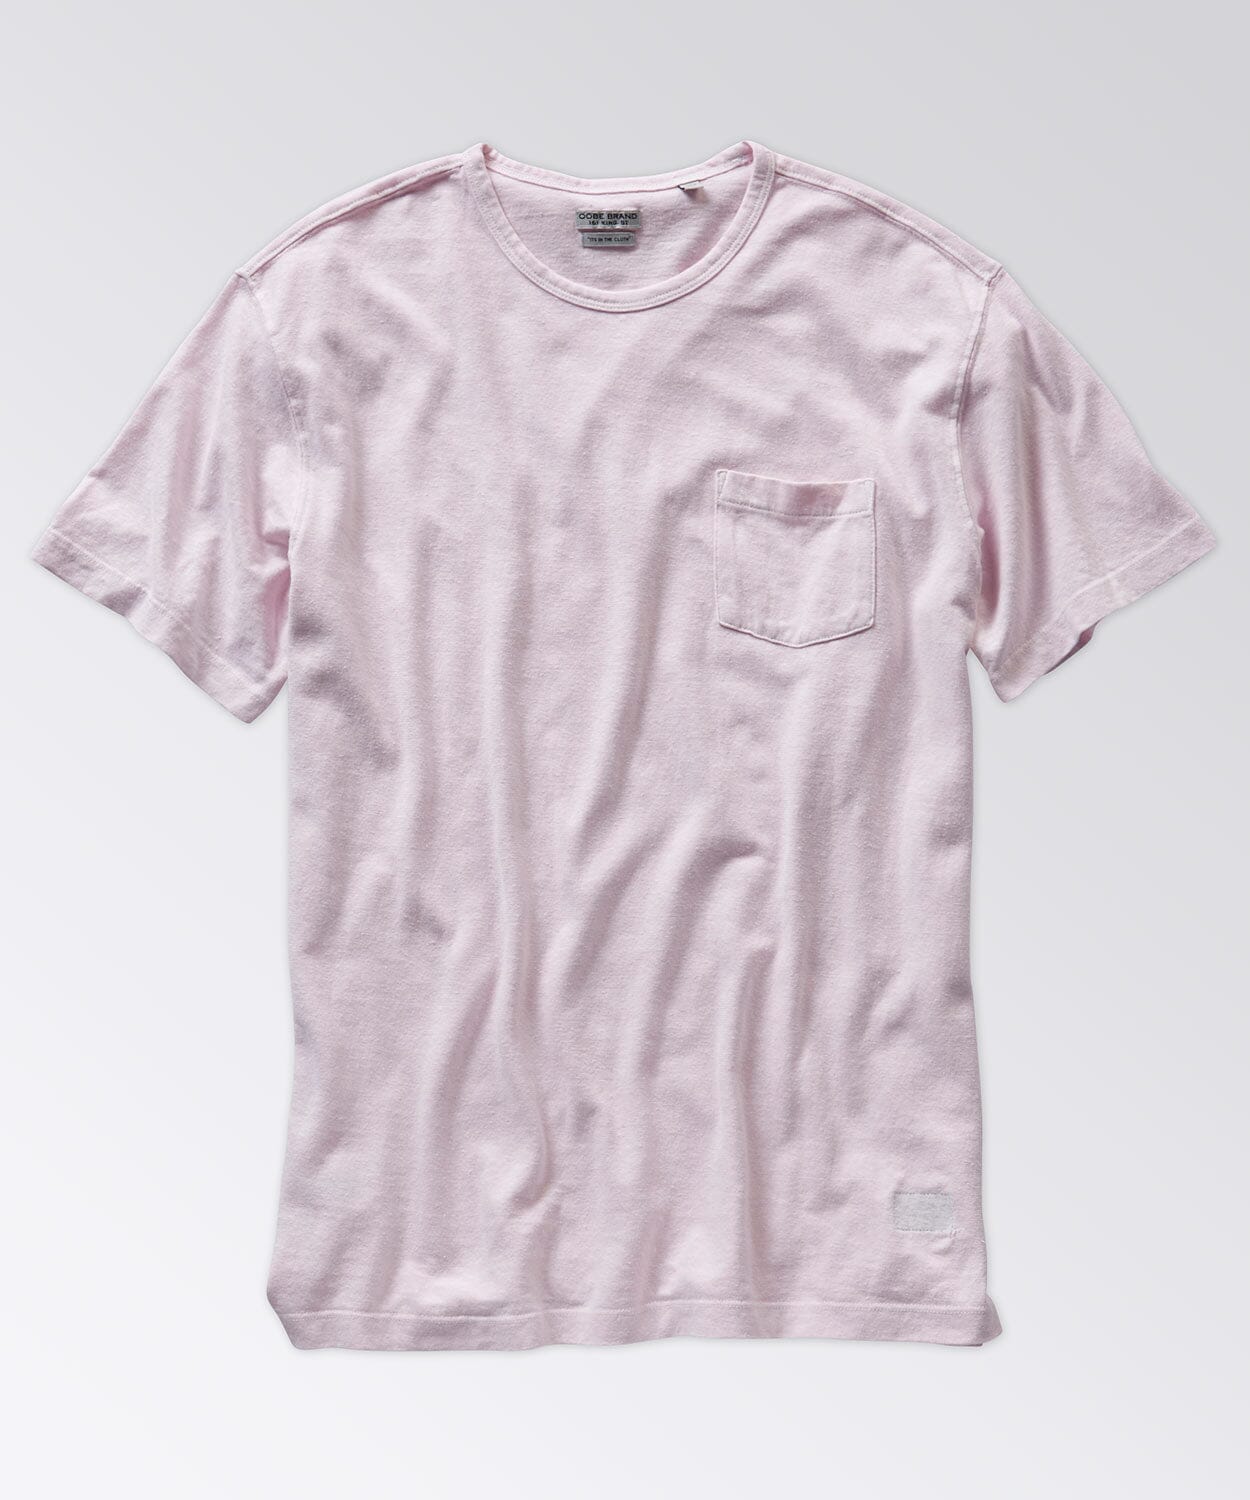 mens solid tee with pocket